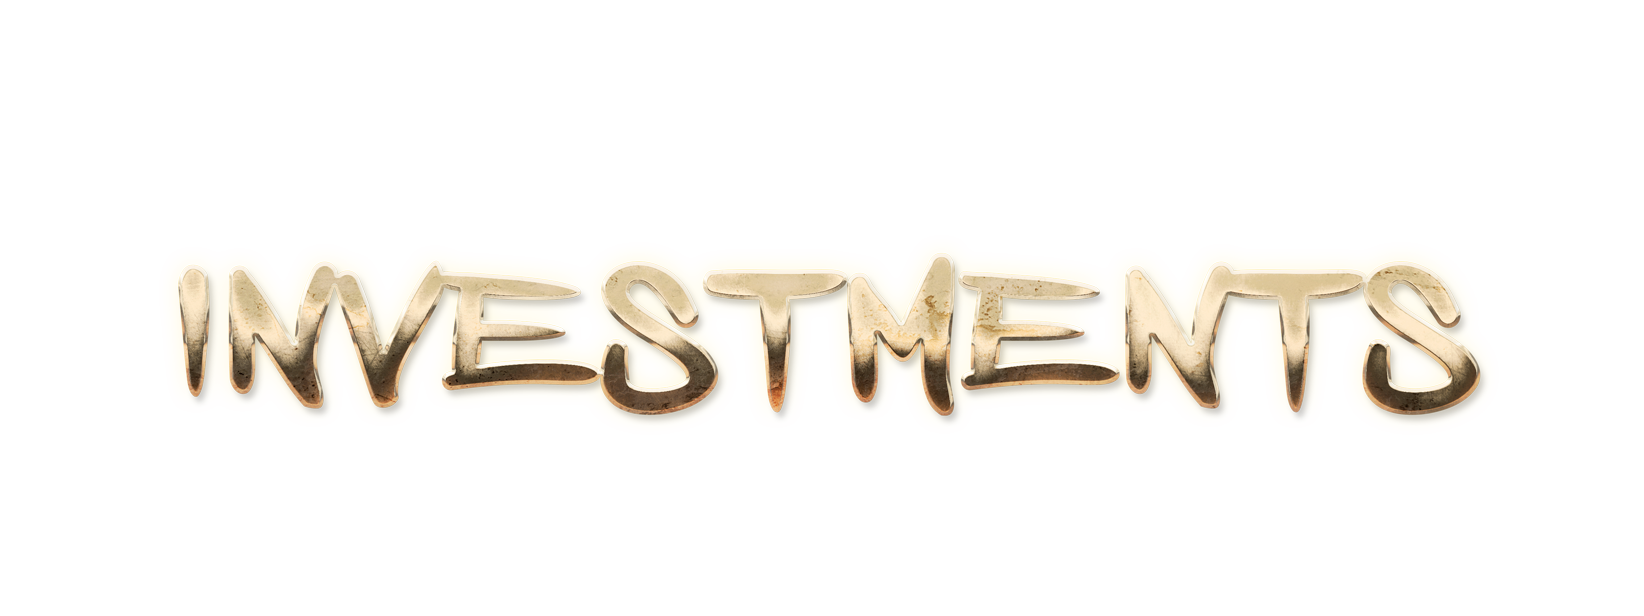 WORD INVESTMENTS gold text effects art typography PNG images free